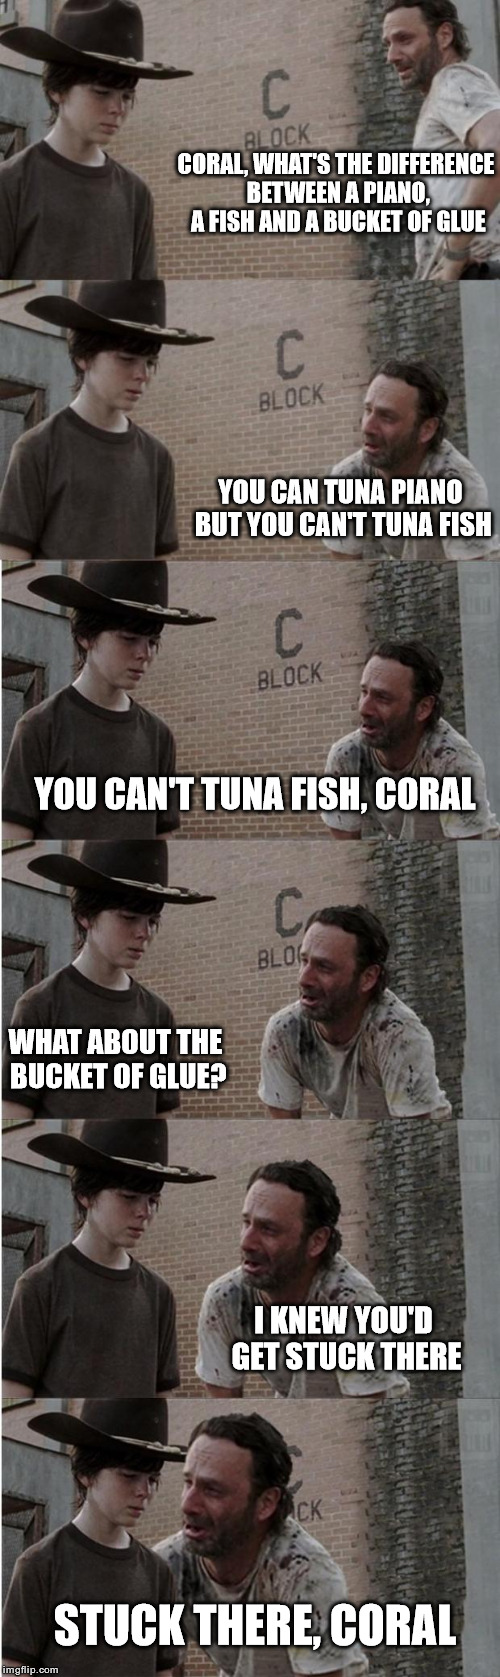 Rick and Carl Longer | CORAL, WHAT'S THE DIFFERENCE BETWEEN A PIANO, A FISH AND A BUCKET OF GLUE; YOU CAN TUNA PIANO BUT YOU CAN'T TUNA FISH; YOU CAN'T TUNA FISH, CORAL; WHAT ABOUT THE BUCKET OF GLUE? I KNEW YOU'D GET STUCK THERE; STUCK THERE, CORAL | image tagged in memes,rick and carl longer | made w/ Imgflip meme maker